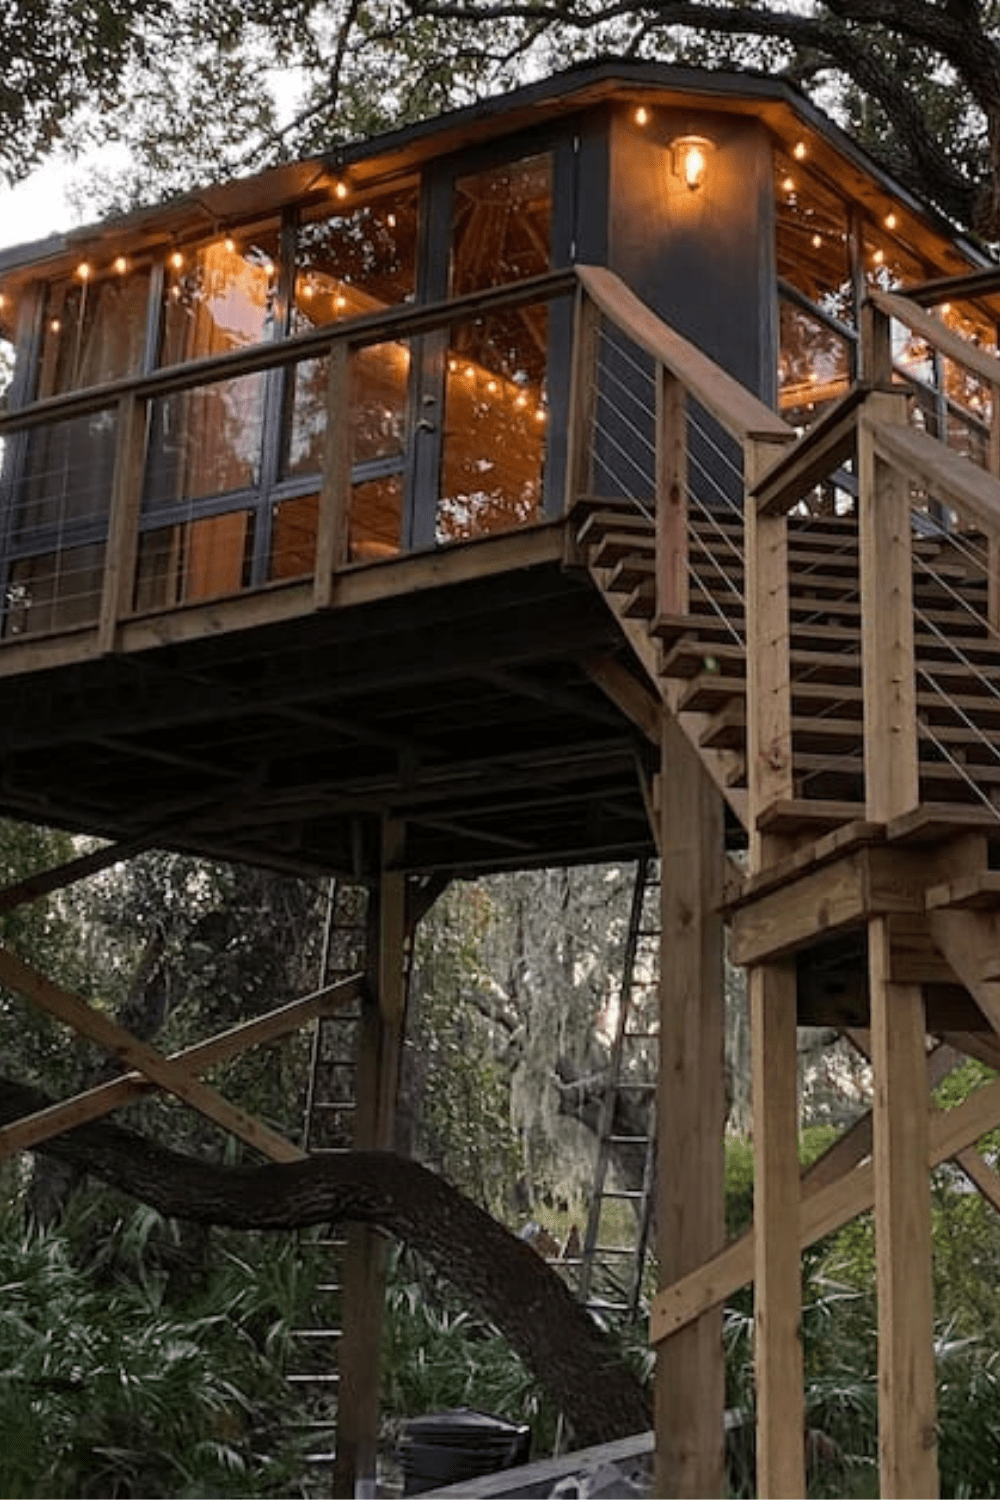 Tiny home ideas deck is 14 feet above ground level